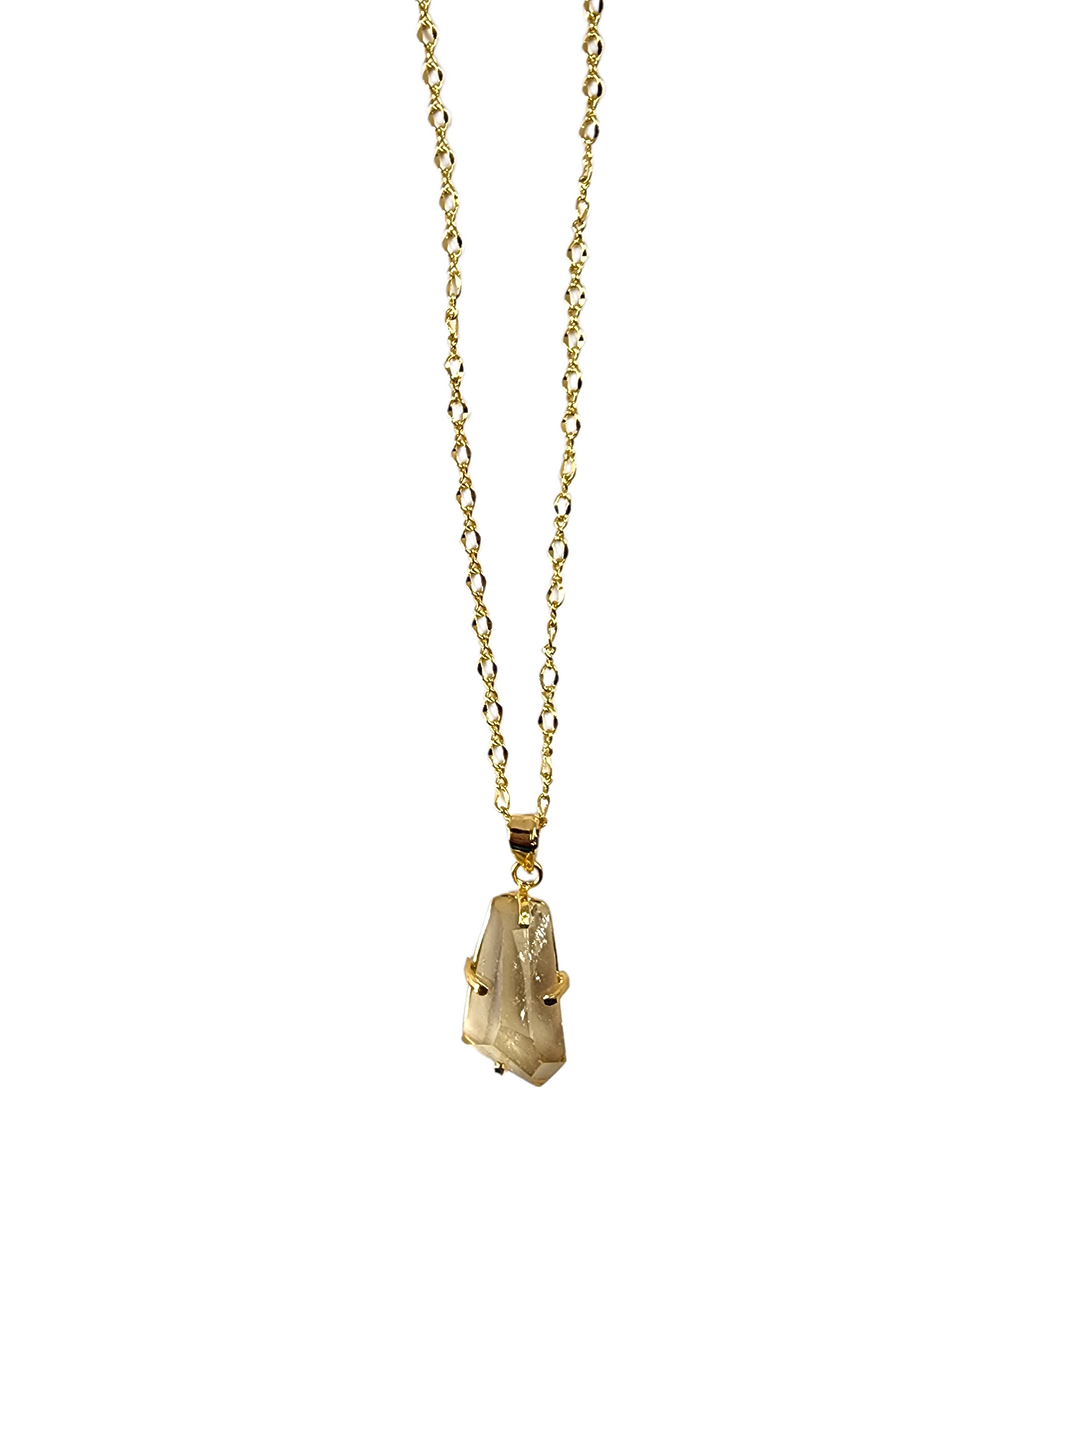 The Kirah Citrine and Smokey Quartz Necklace Collection